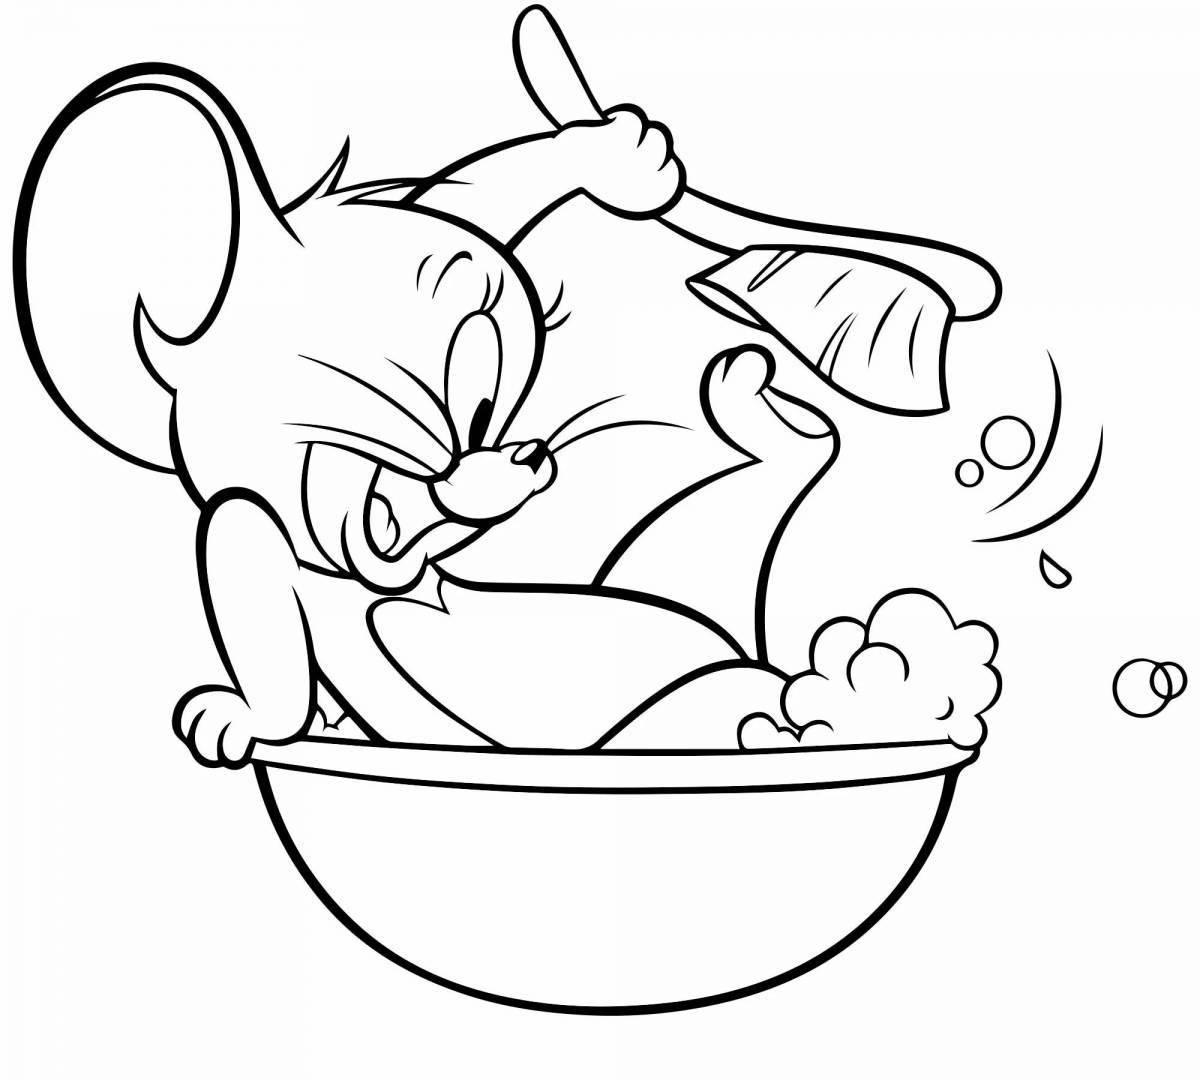 Funny tom and jerry coloring book